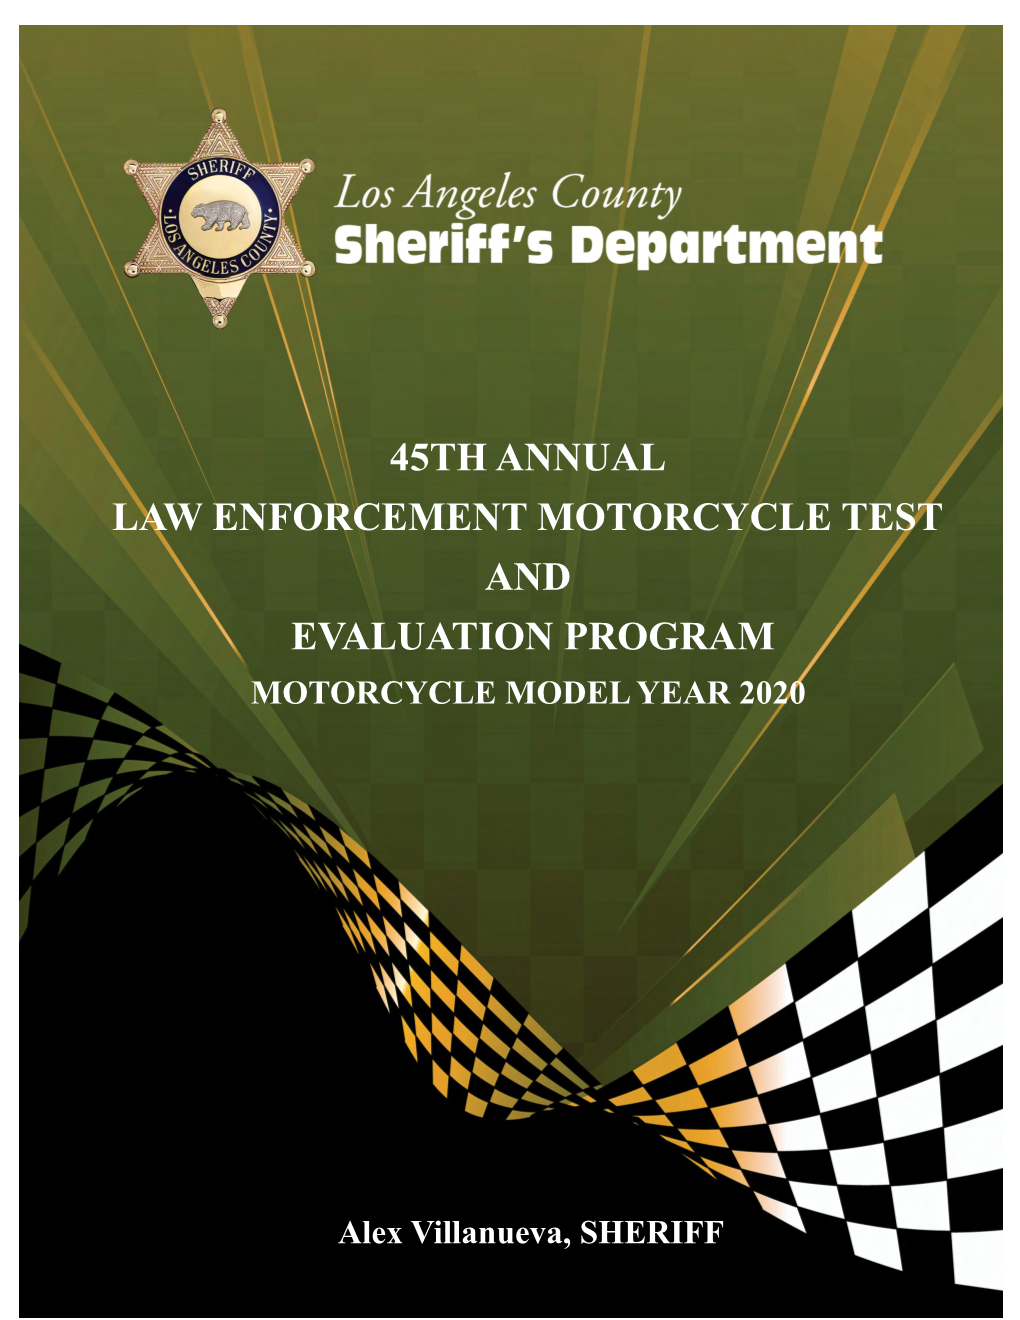 45Th Annual Law Enforcement Motorcycle Test and Evaluation Program Motorcycle Model Year 2020